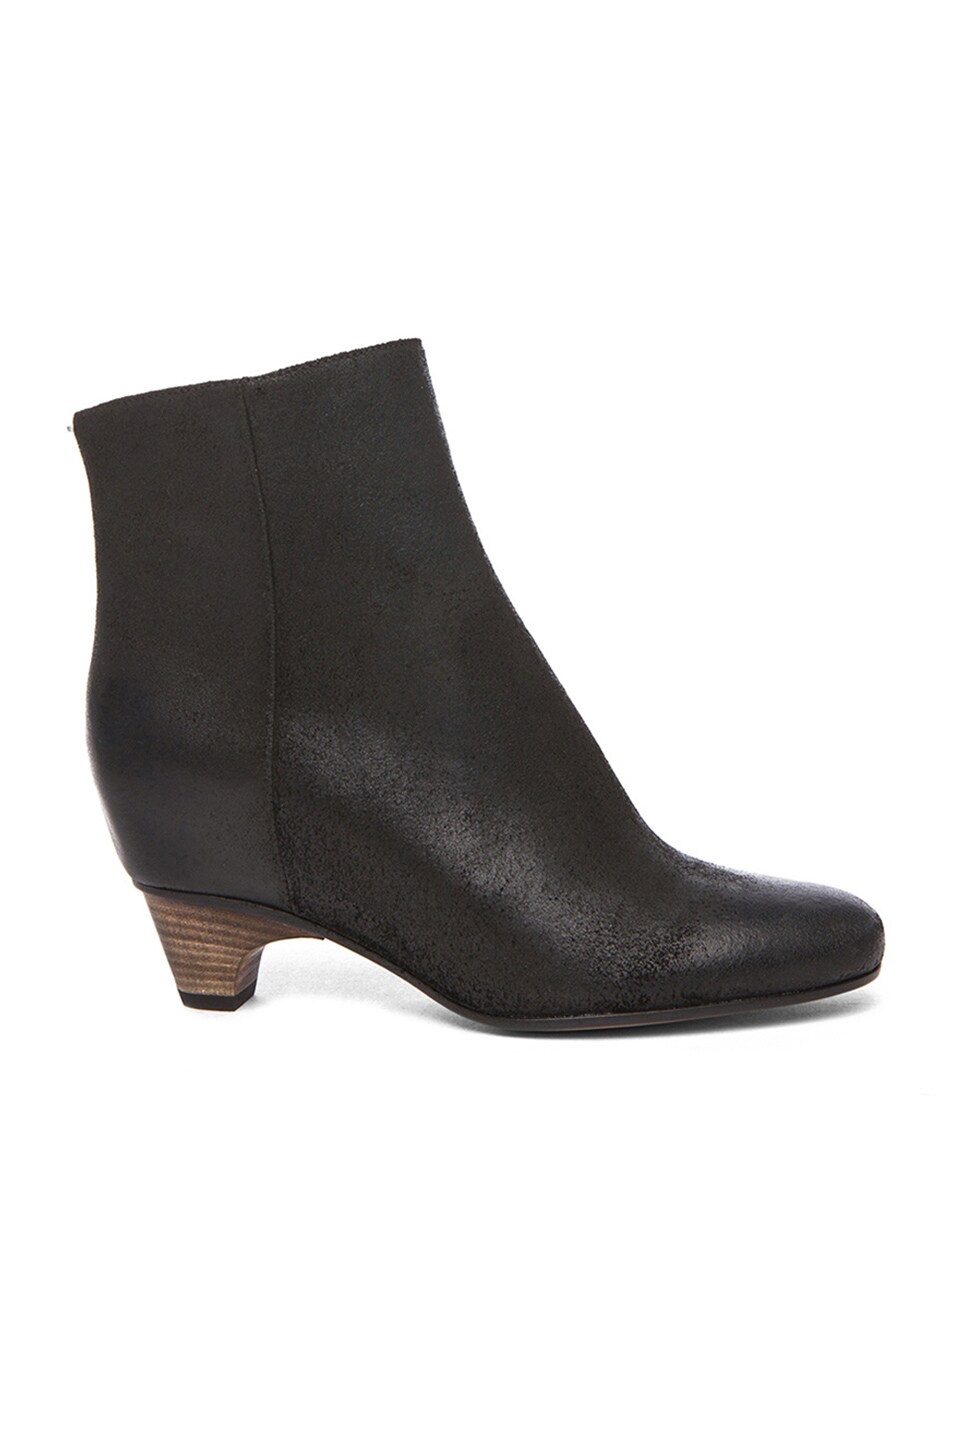 Image 1 of Maison Margiela Leather Booties in Black